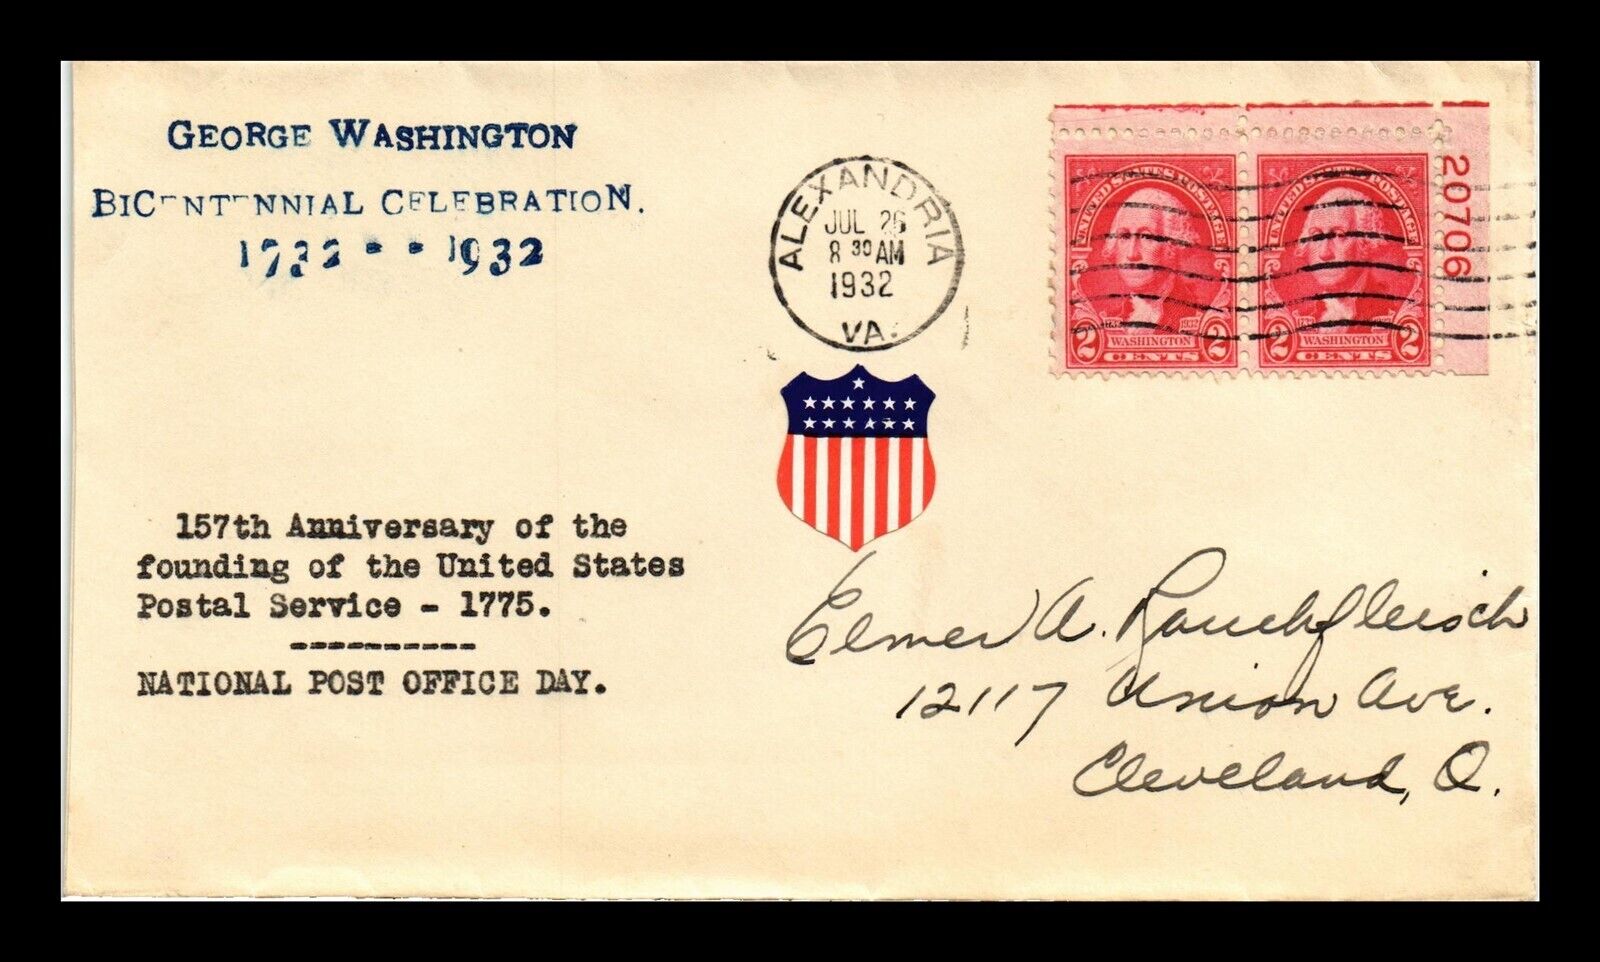 DR JIM STAMPS US GEORGE WASHINGTON BICENTENNIAL NATIONAL POST OFFICE DAY COVER